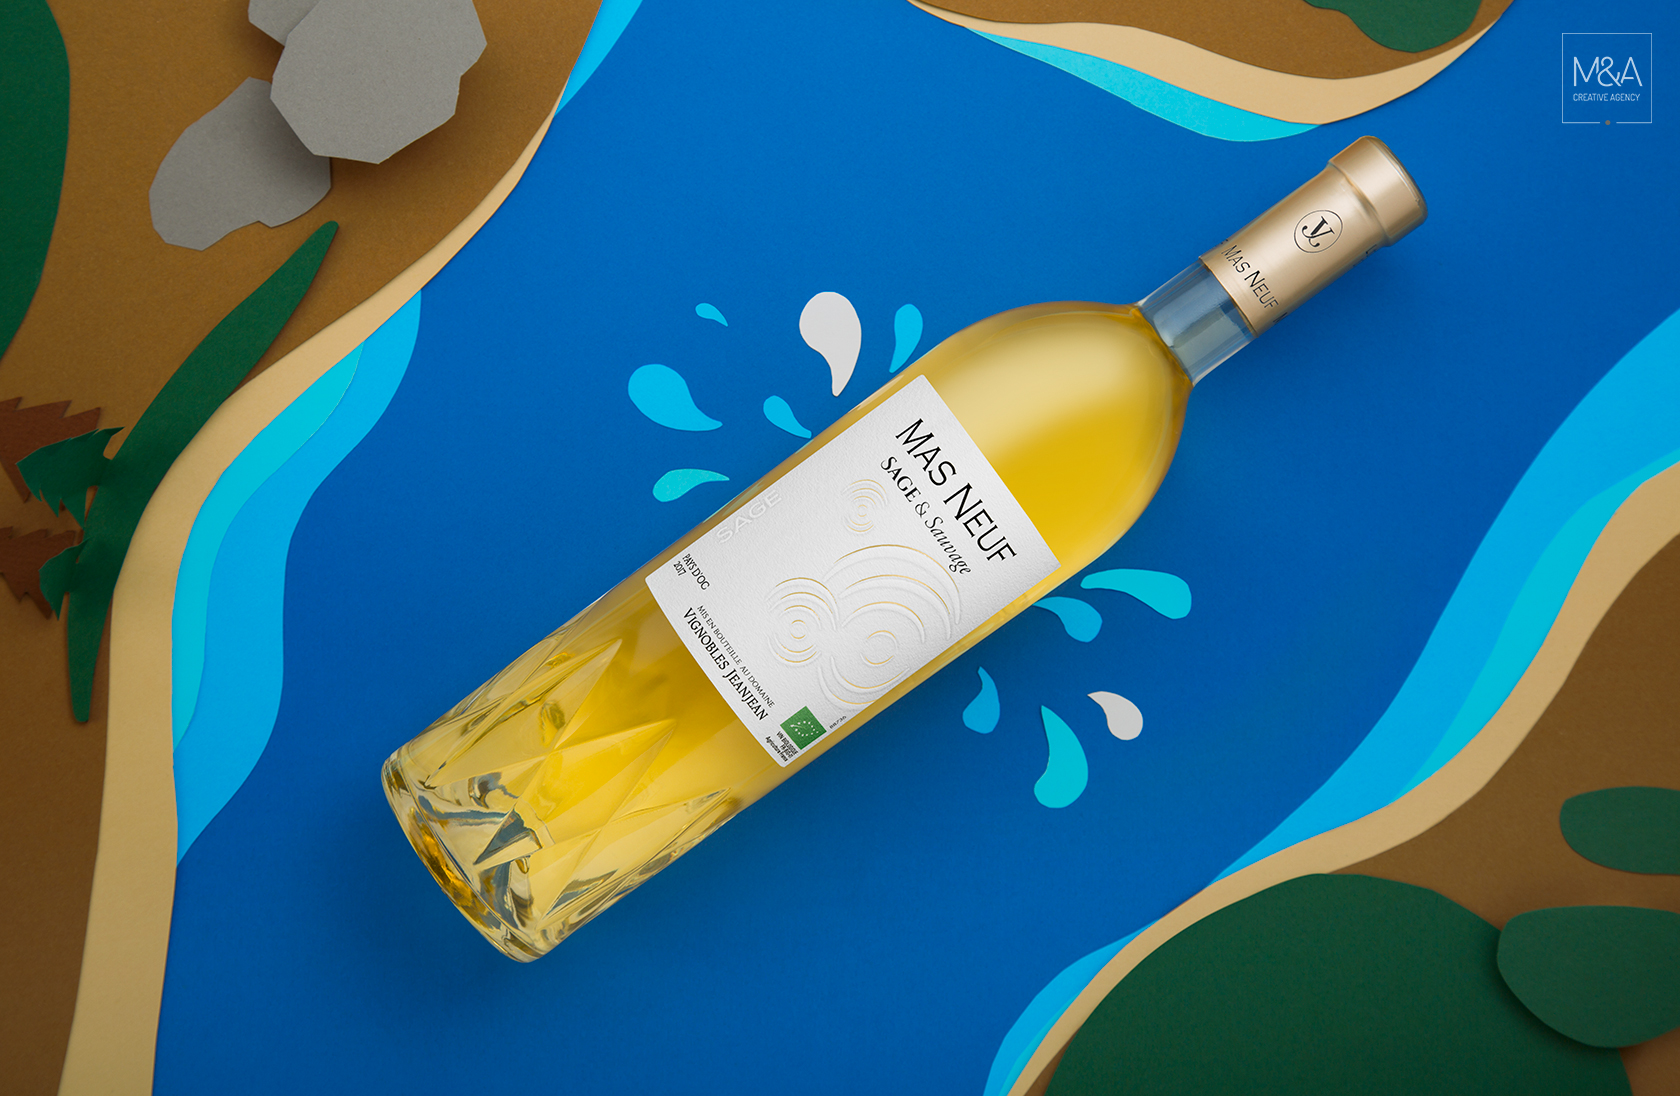 Between a Lake and Mediterranean Sea we Present White and Rose Wines Rebranded